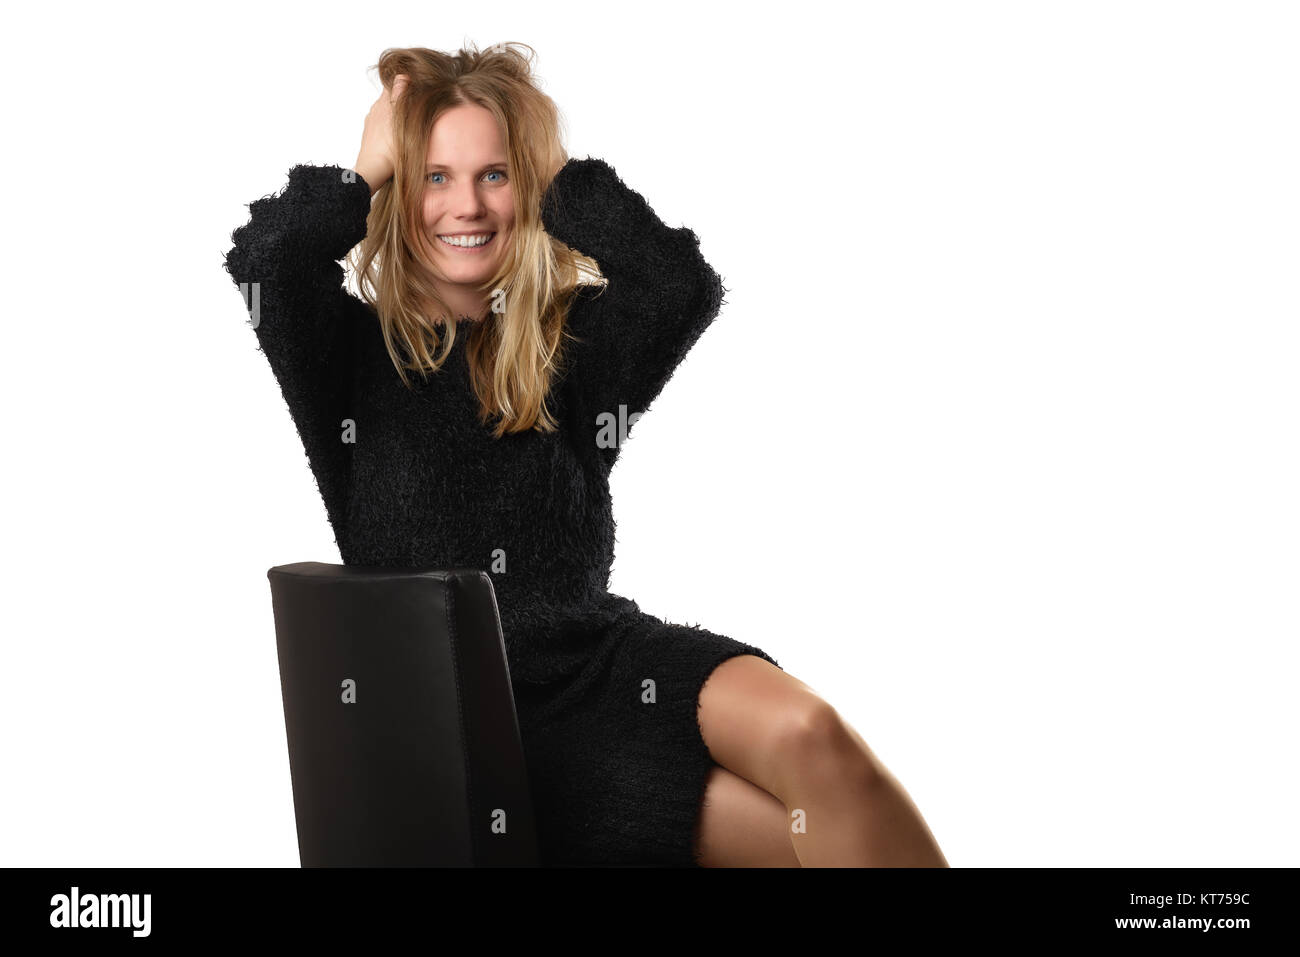 smiling blonde woman in fluffy black dress tearing her hair Stock Photo